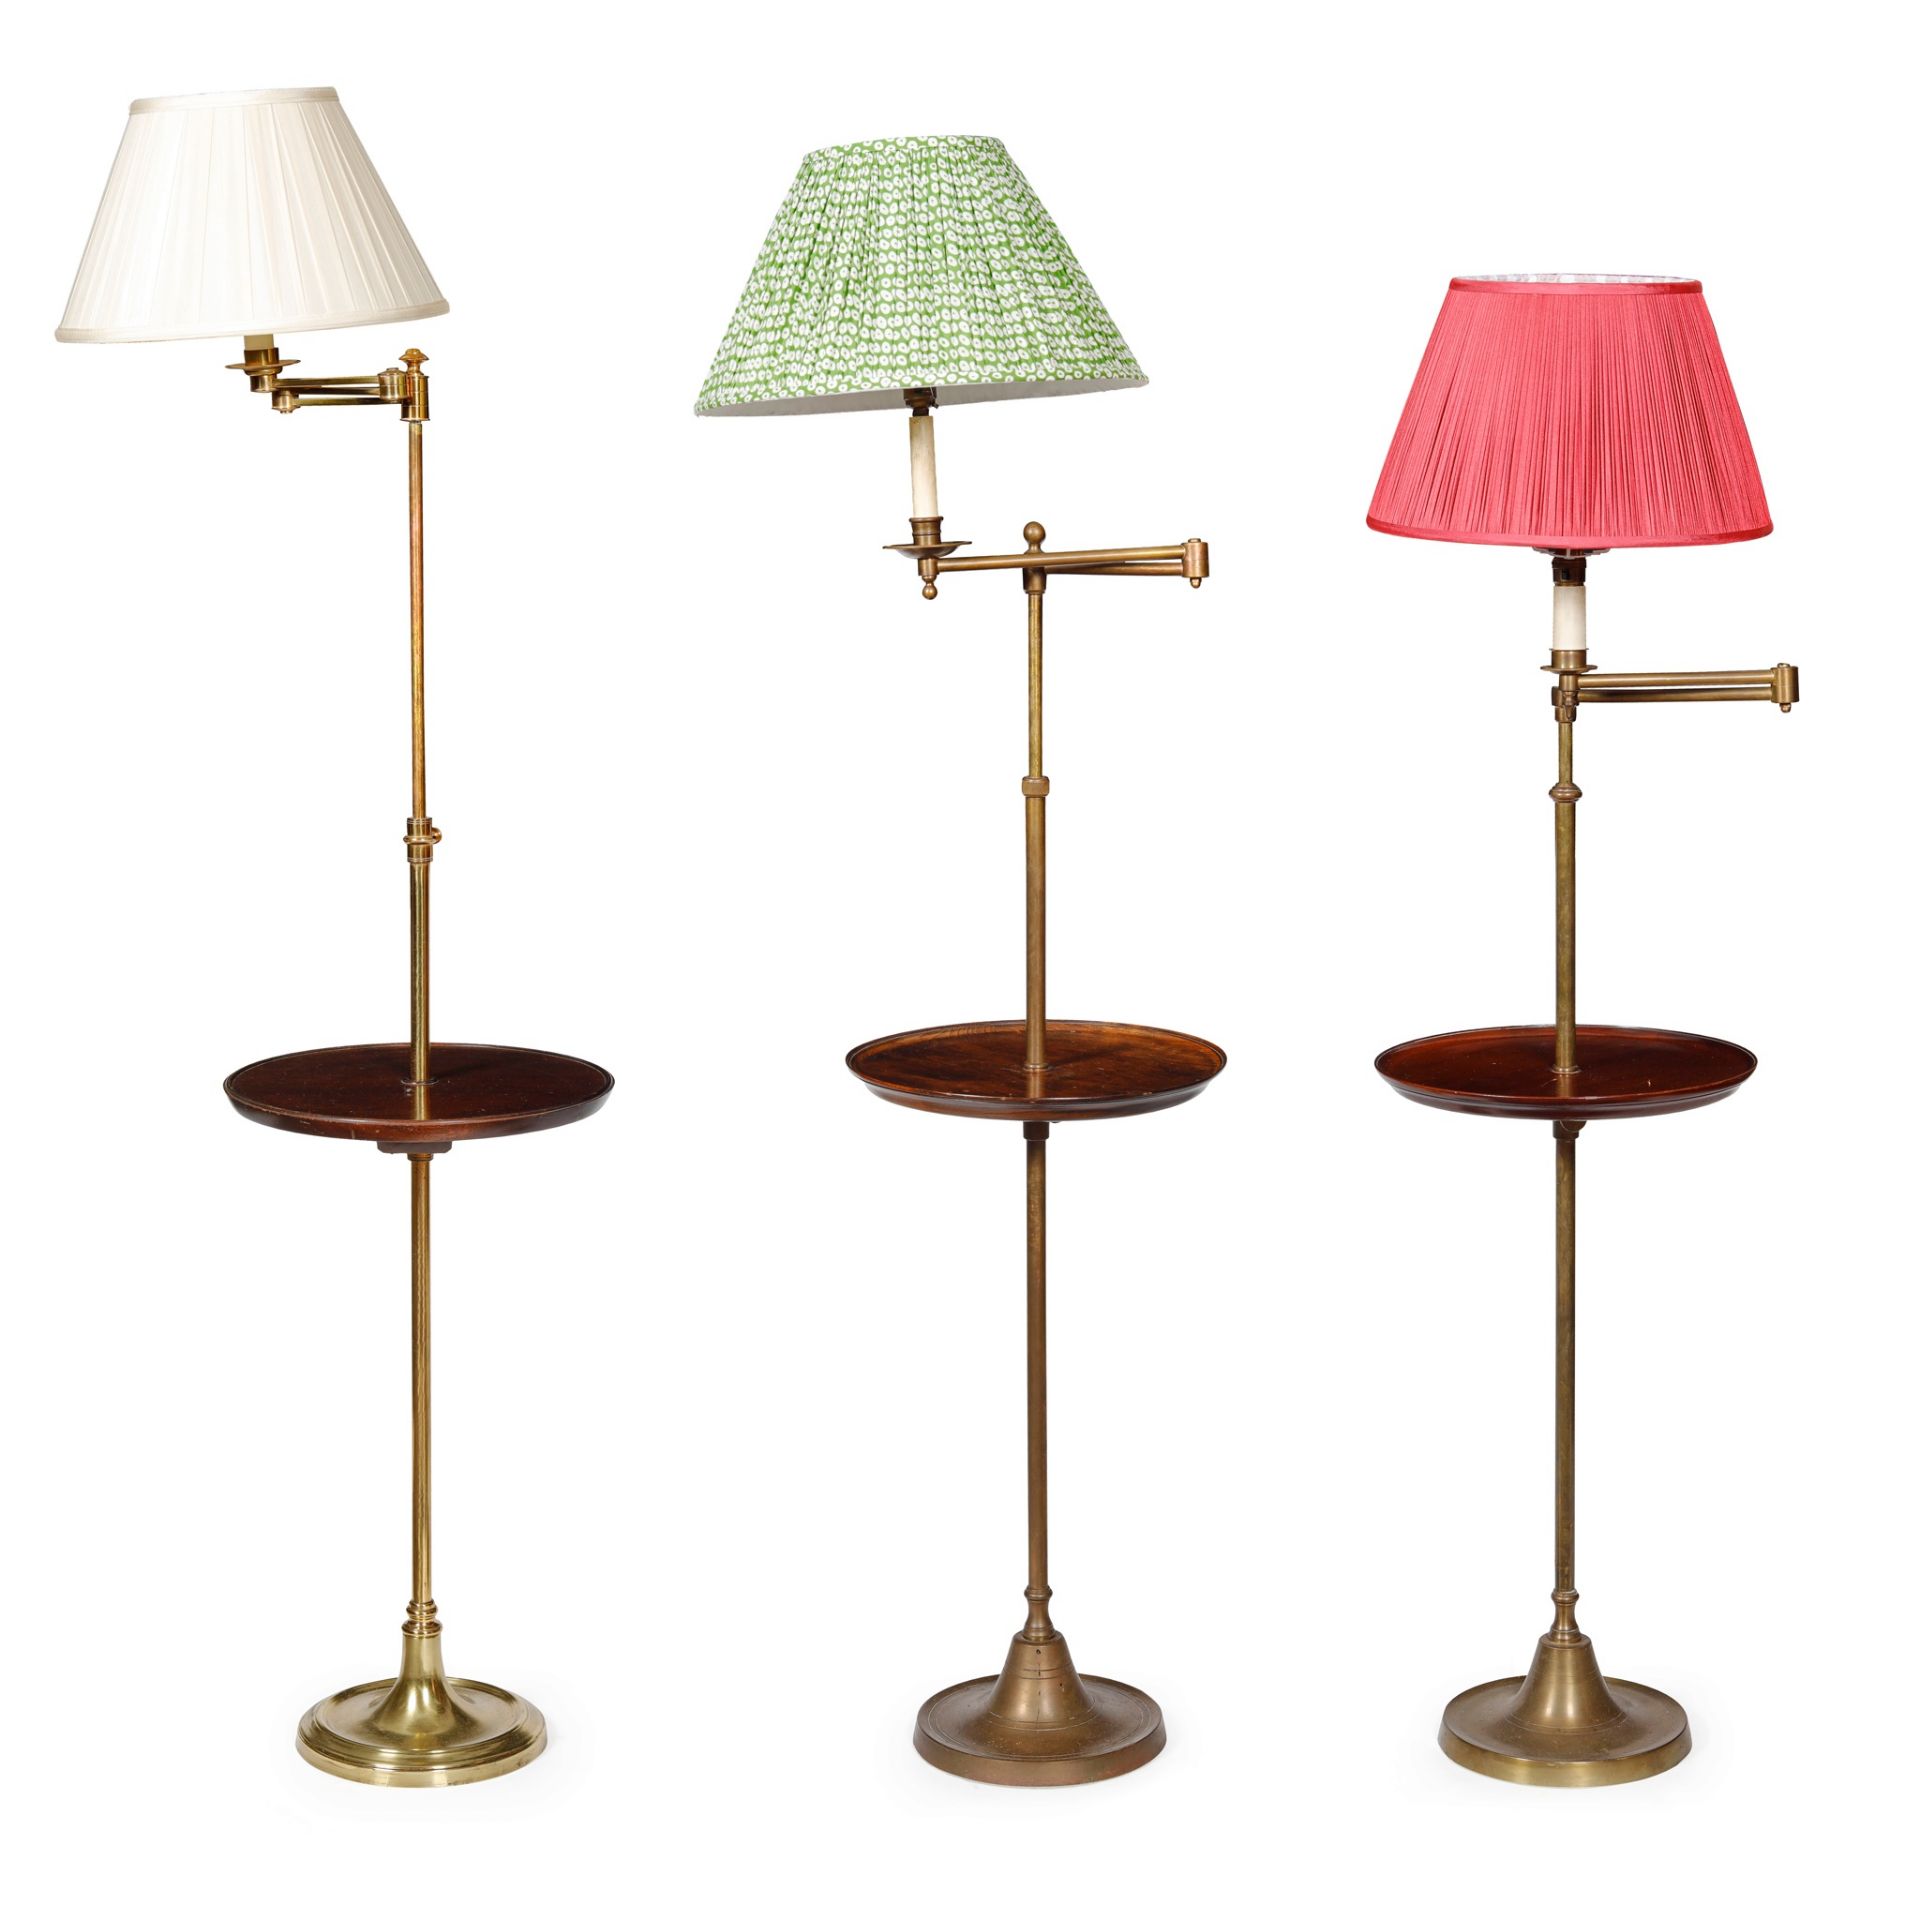 NEAR PAIR OF ADJUSTABLE BRASS FLOOR LAMPS LATE 19TH CENTURY - Image 2 of 3